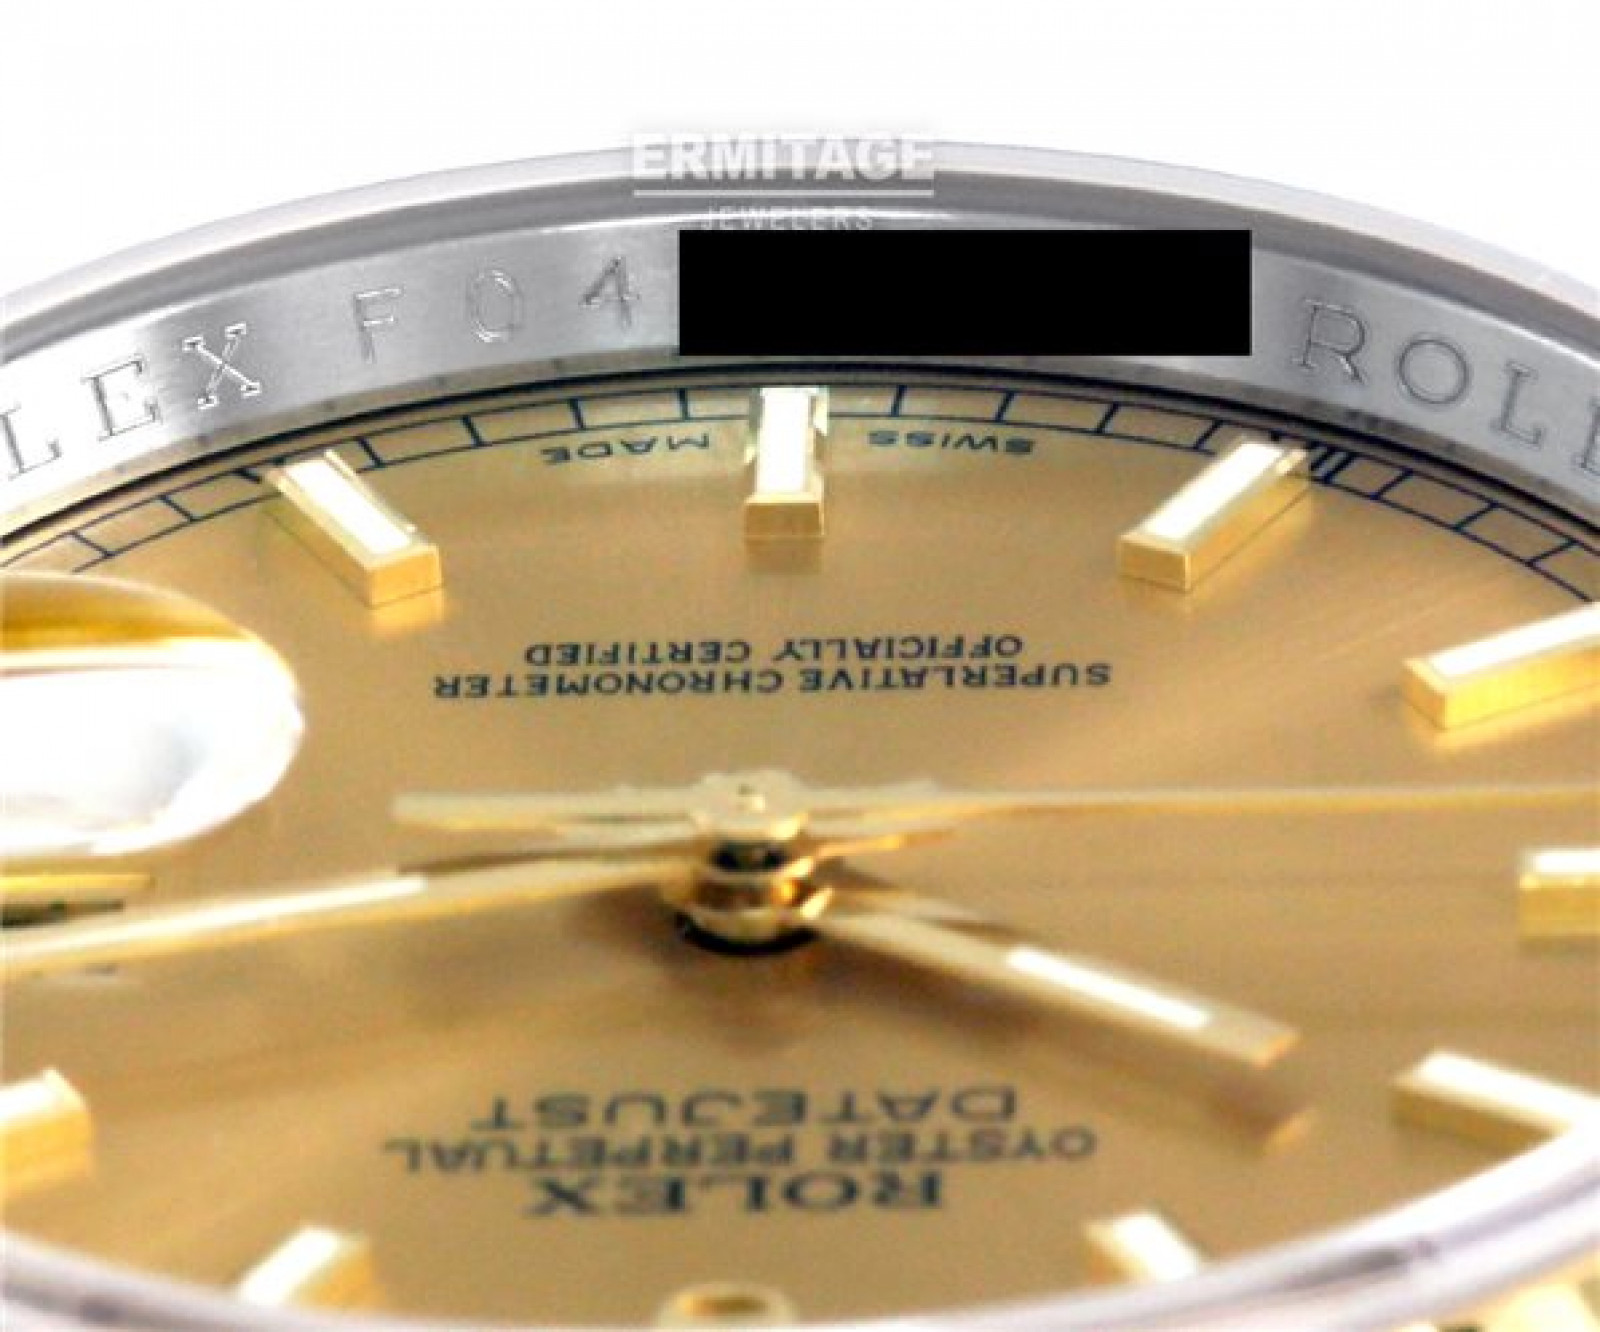 Pre-Owned Gold & Steel Rolex Datejust 116233